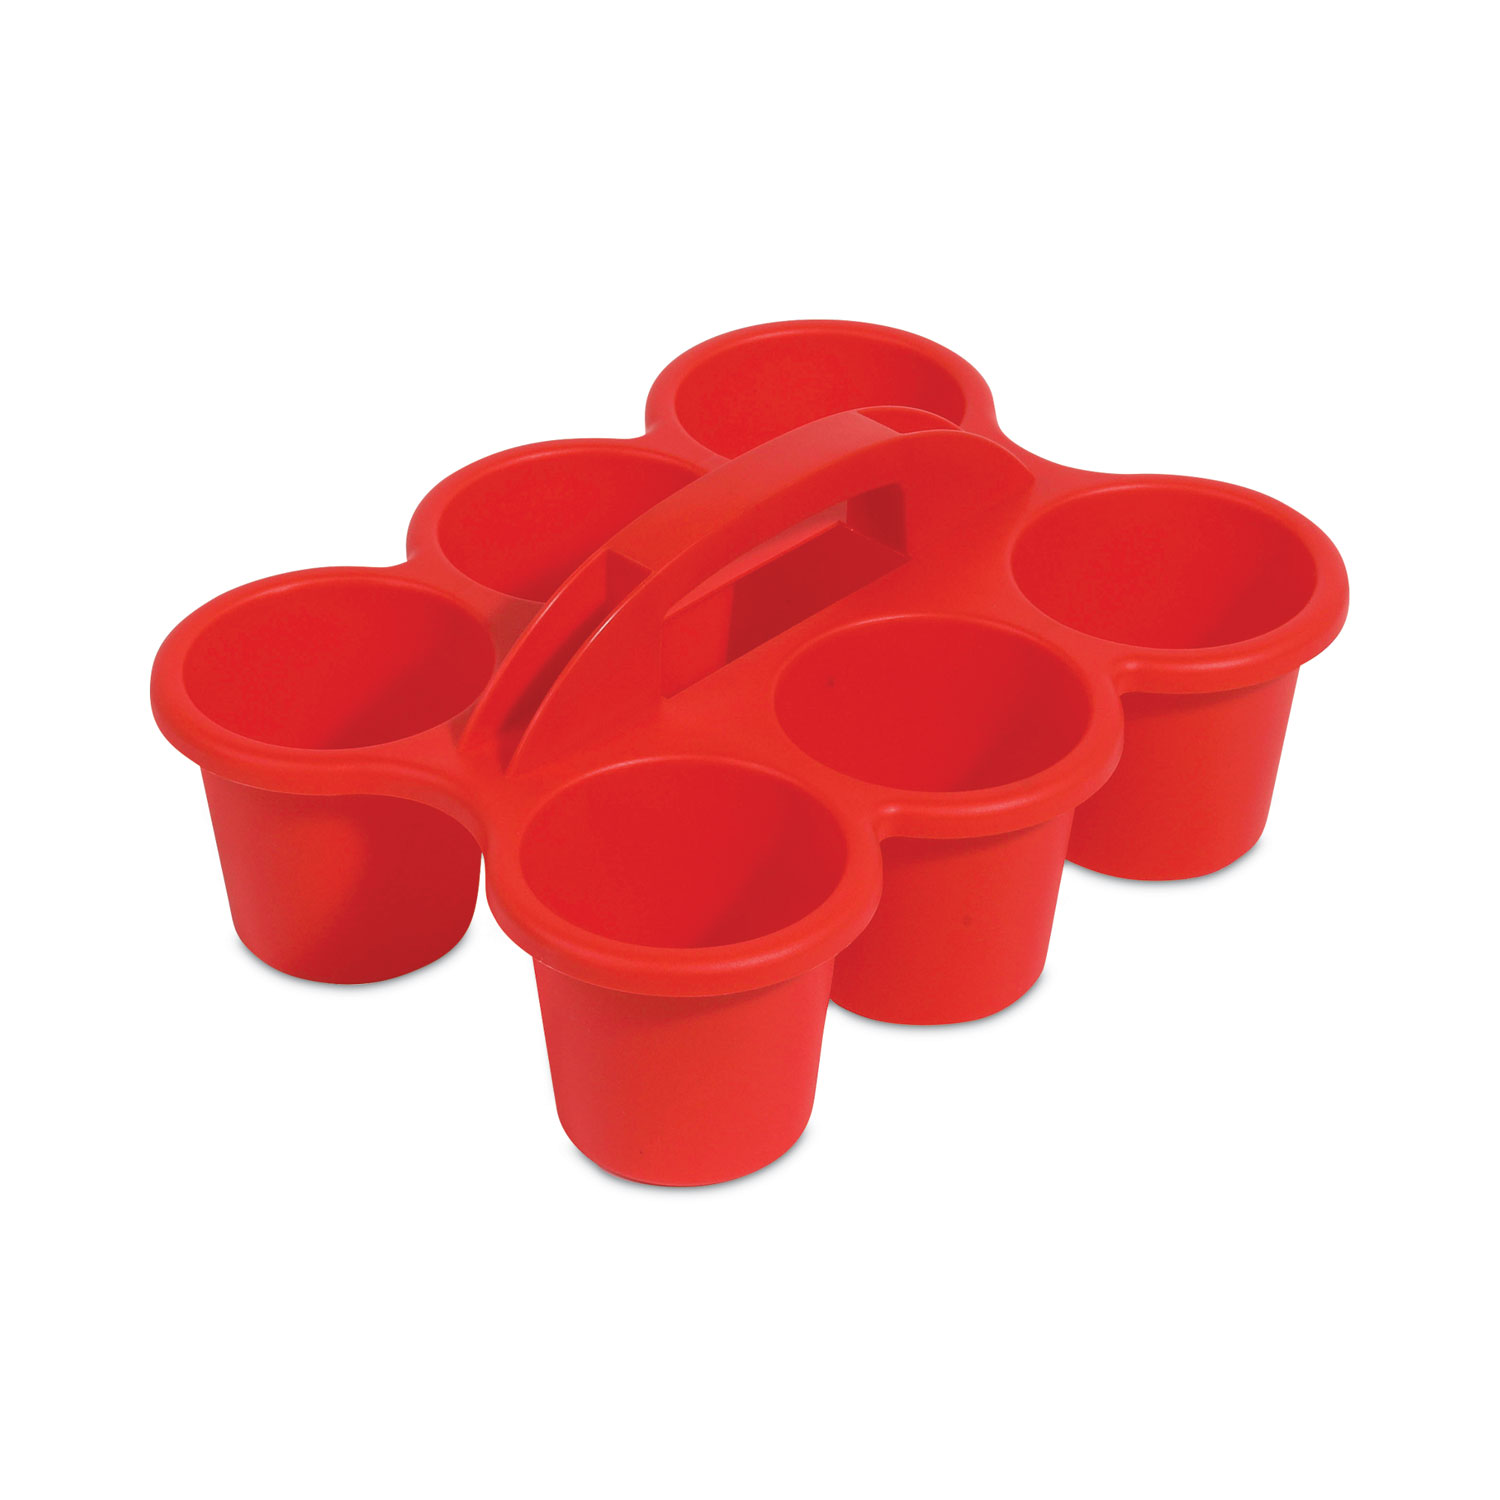 Stackable Caddy for Baking Supplies